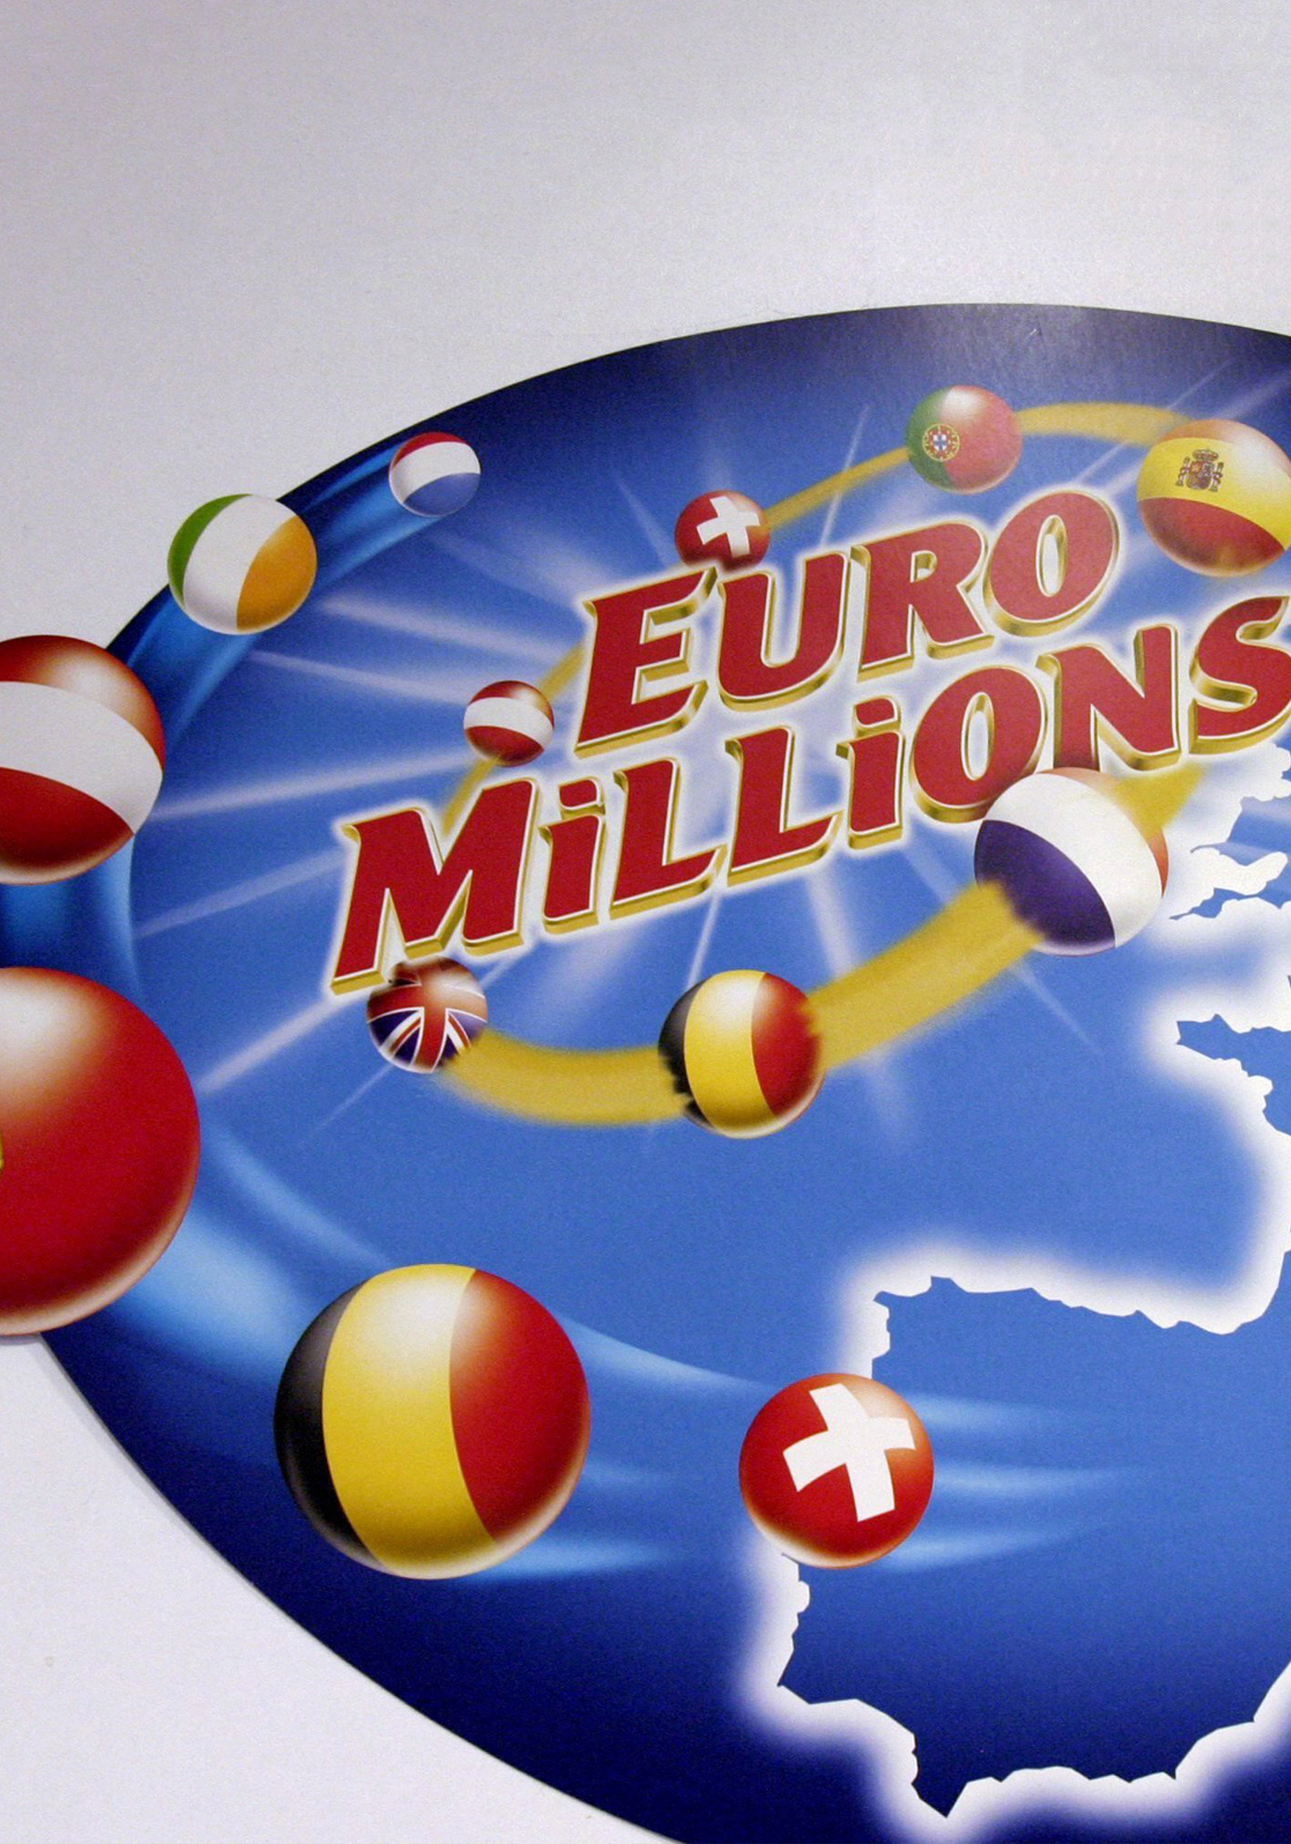 Tirages Euromillions